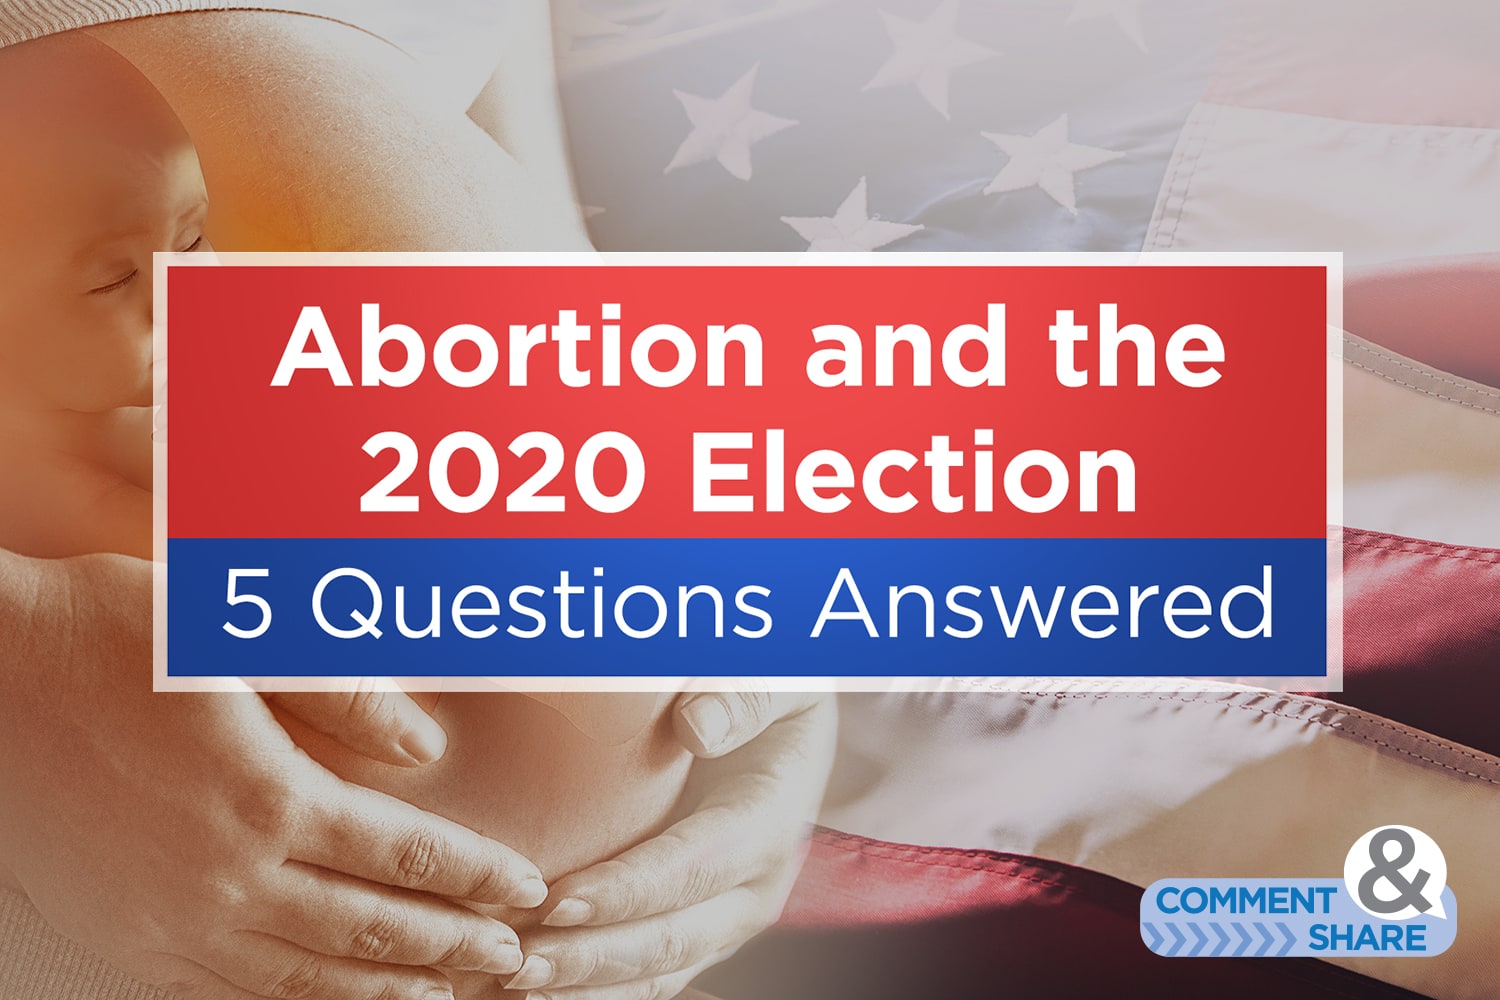 Abortion and the 2020 Election